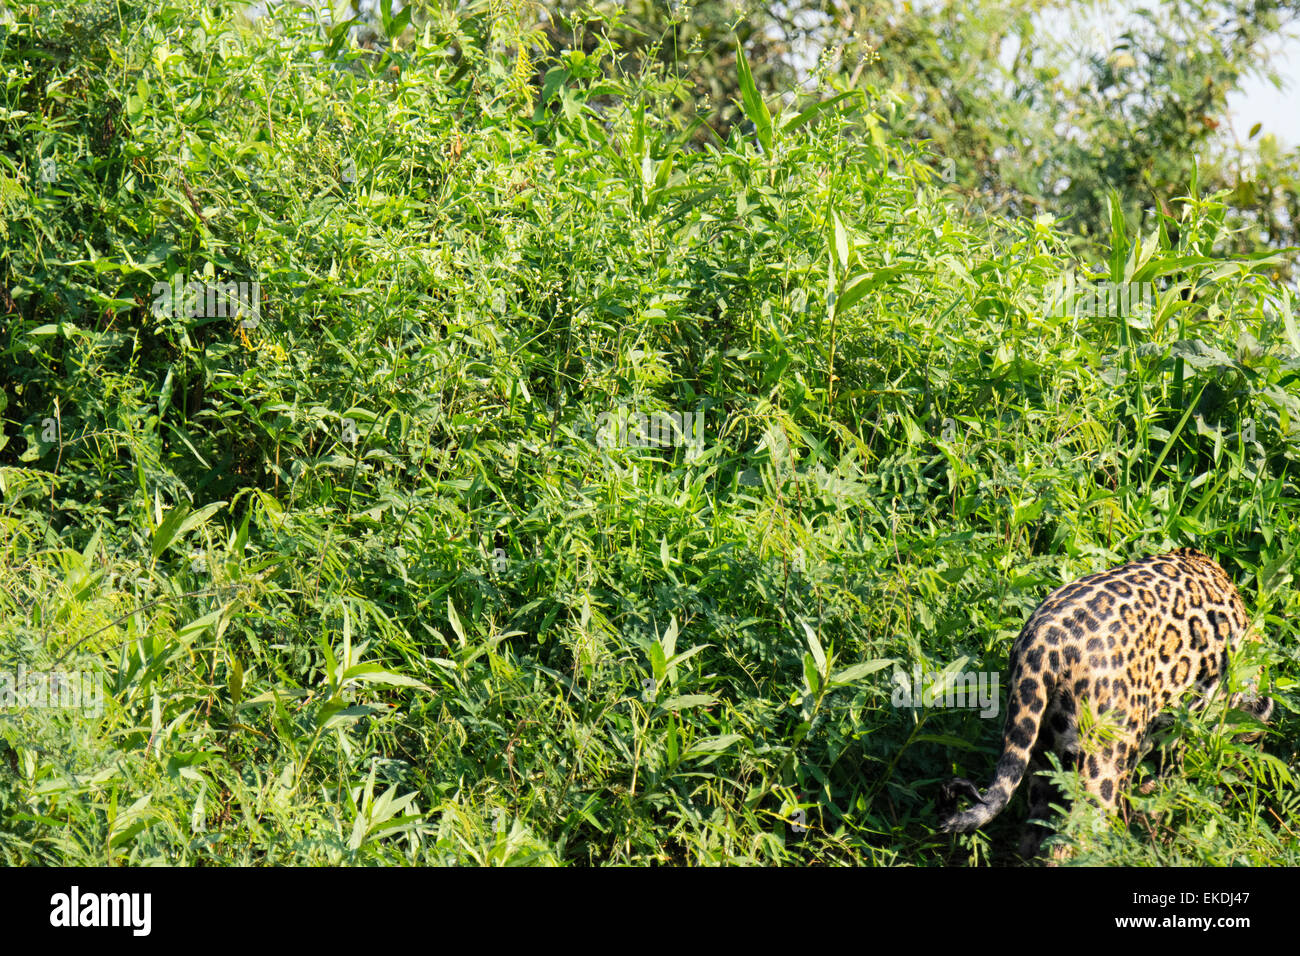 Elusive wild Jaguar, Panthera onca, disappearing into the underbrush by a river in the Pantanal, Brazil, South America Stock Photo